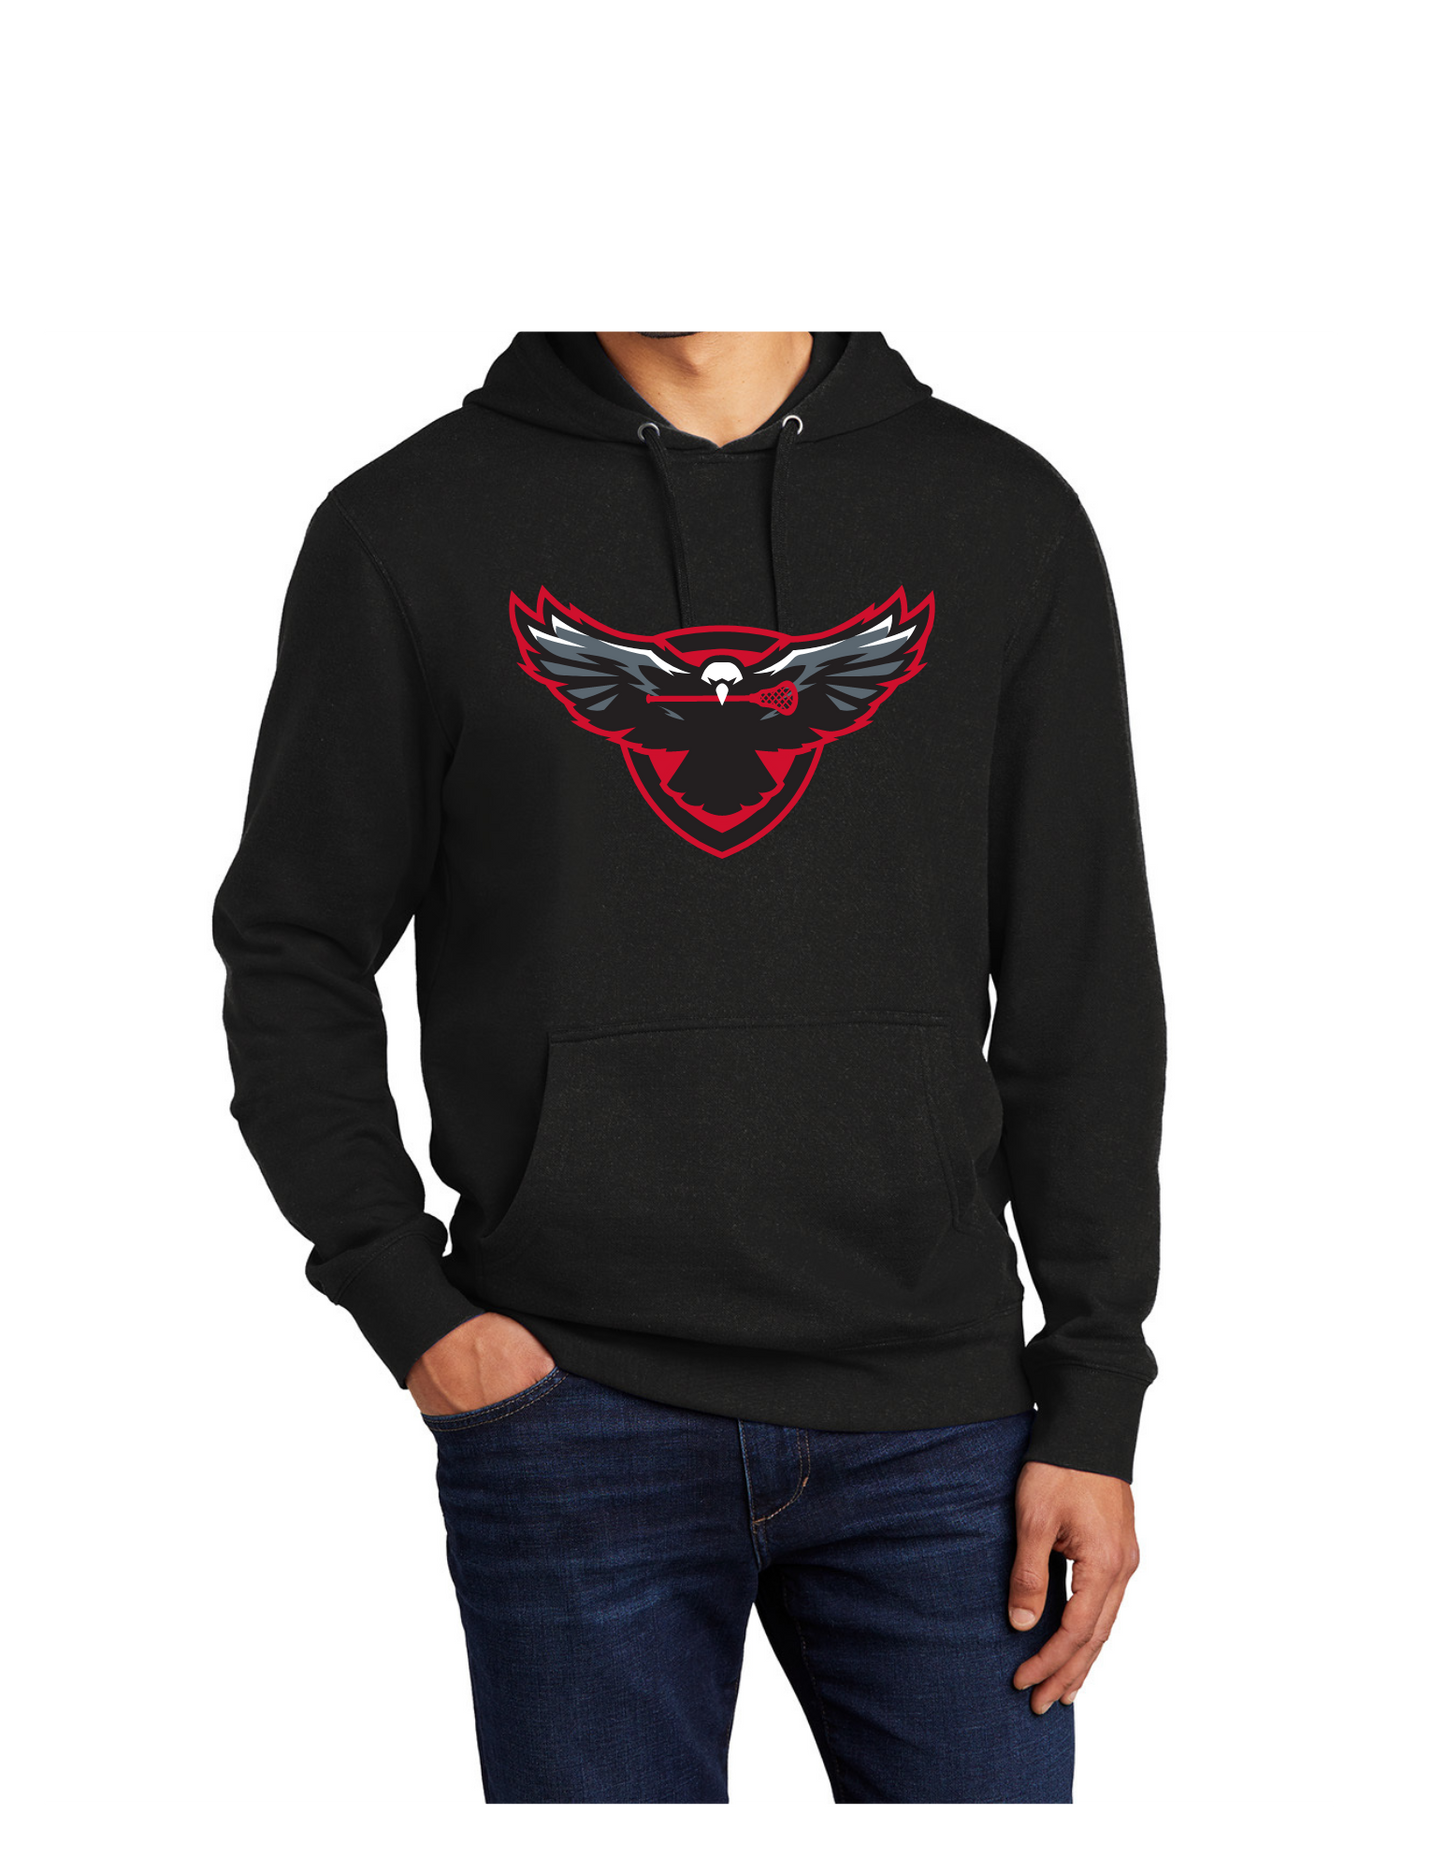 North Tapps Lacrosse District V.I.T. Fleece Hoodie